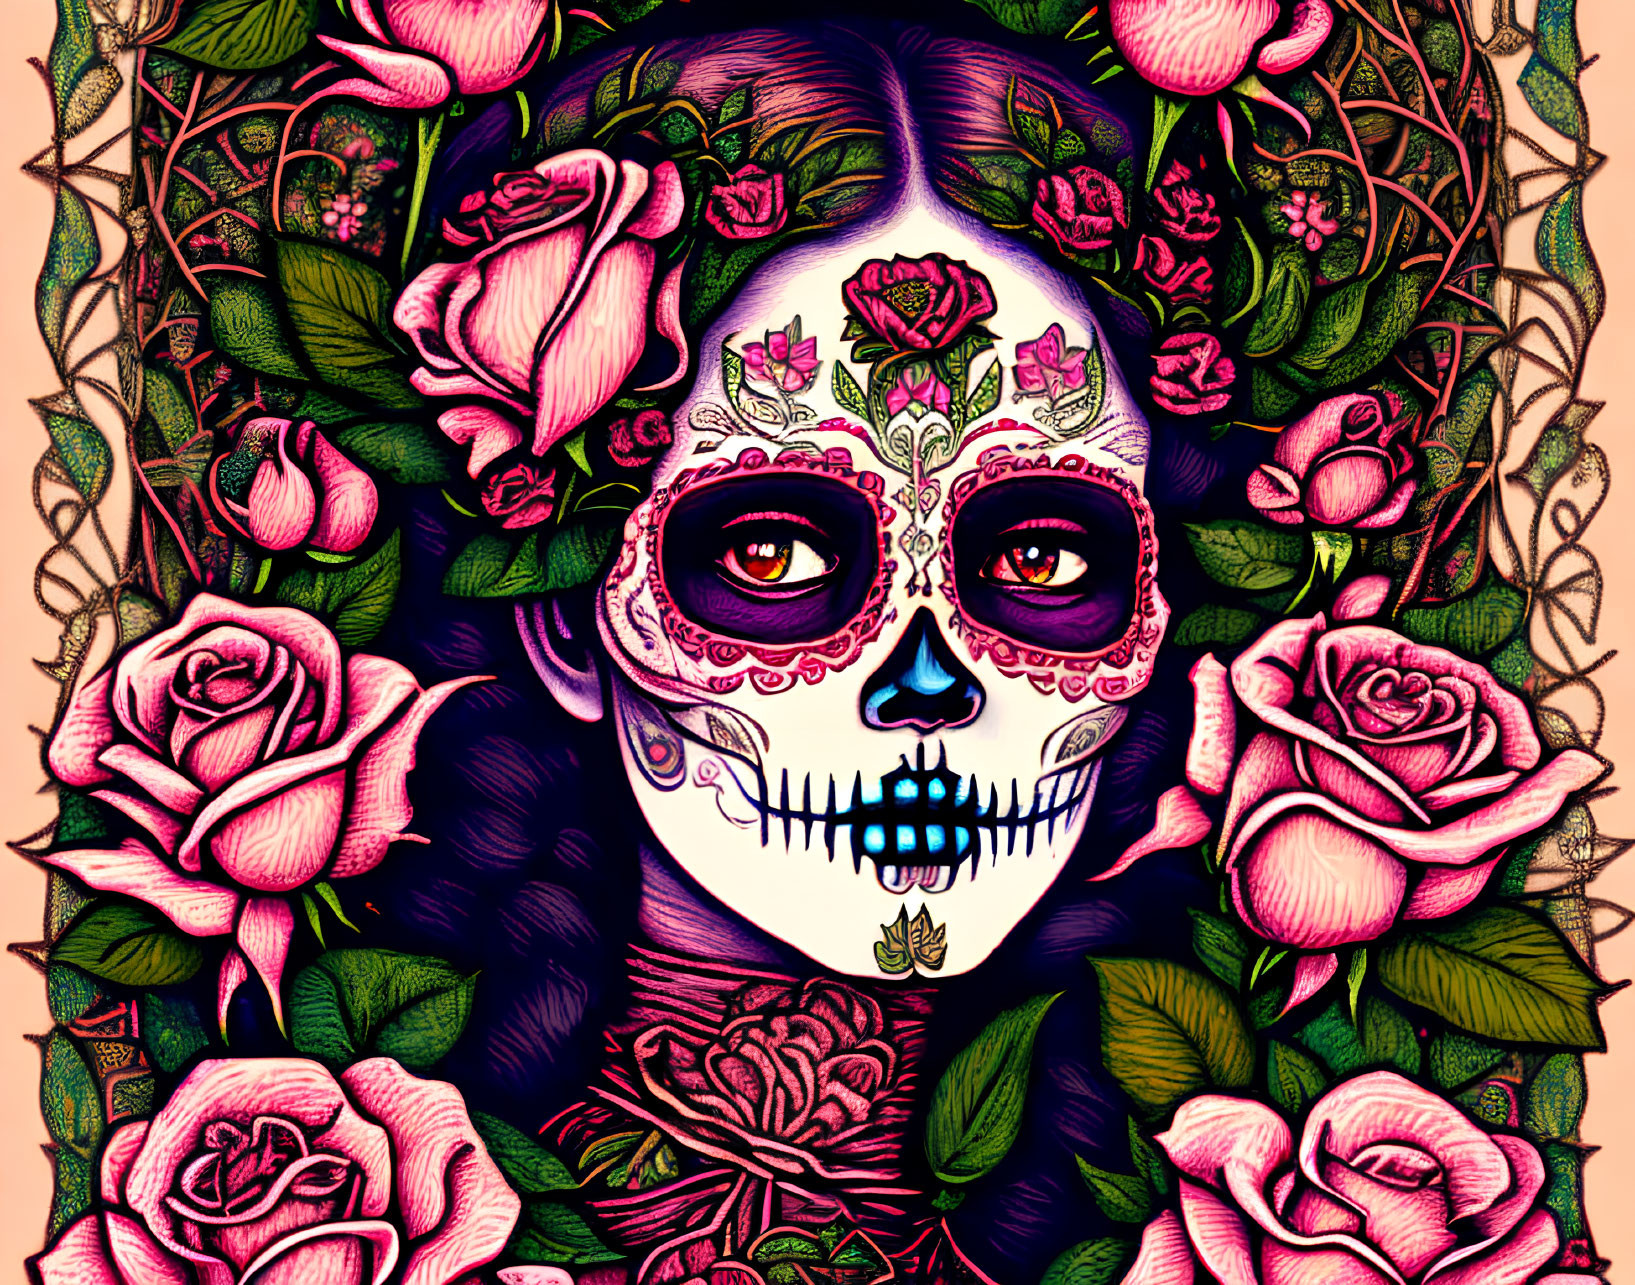 Vibrant skull-painted woman with roses and vines in Day of the Dead style